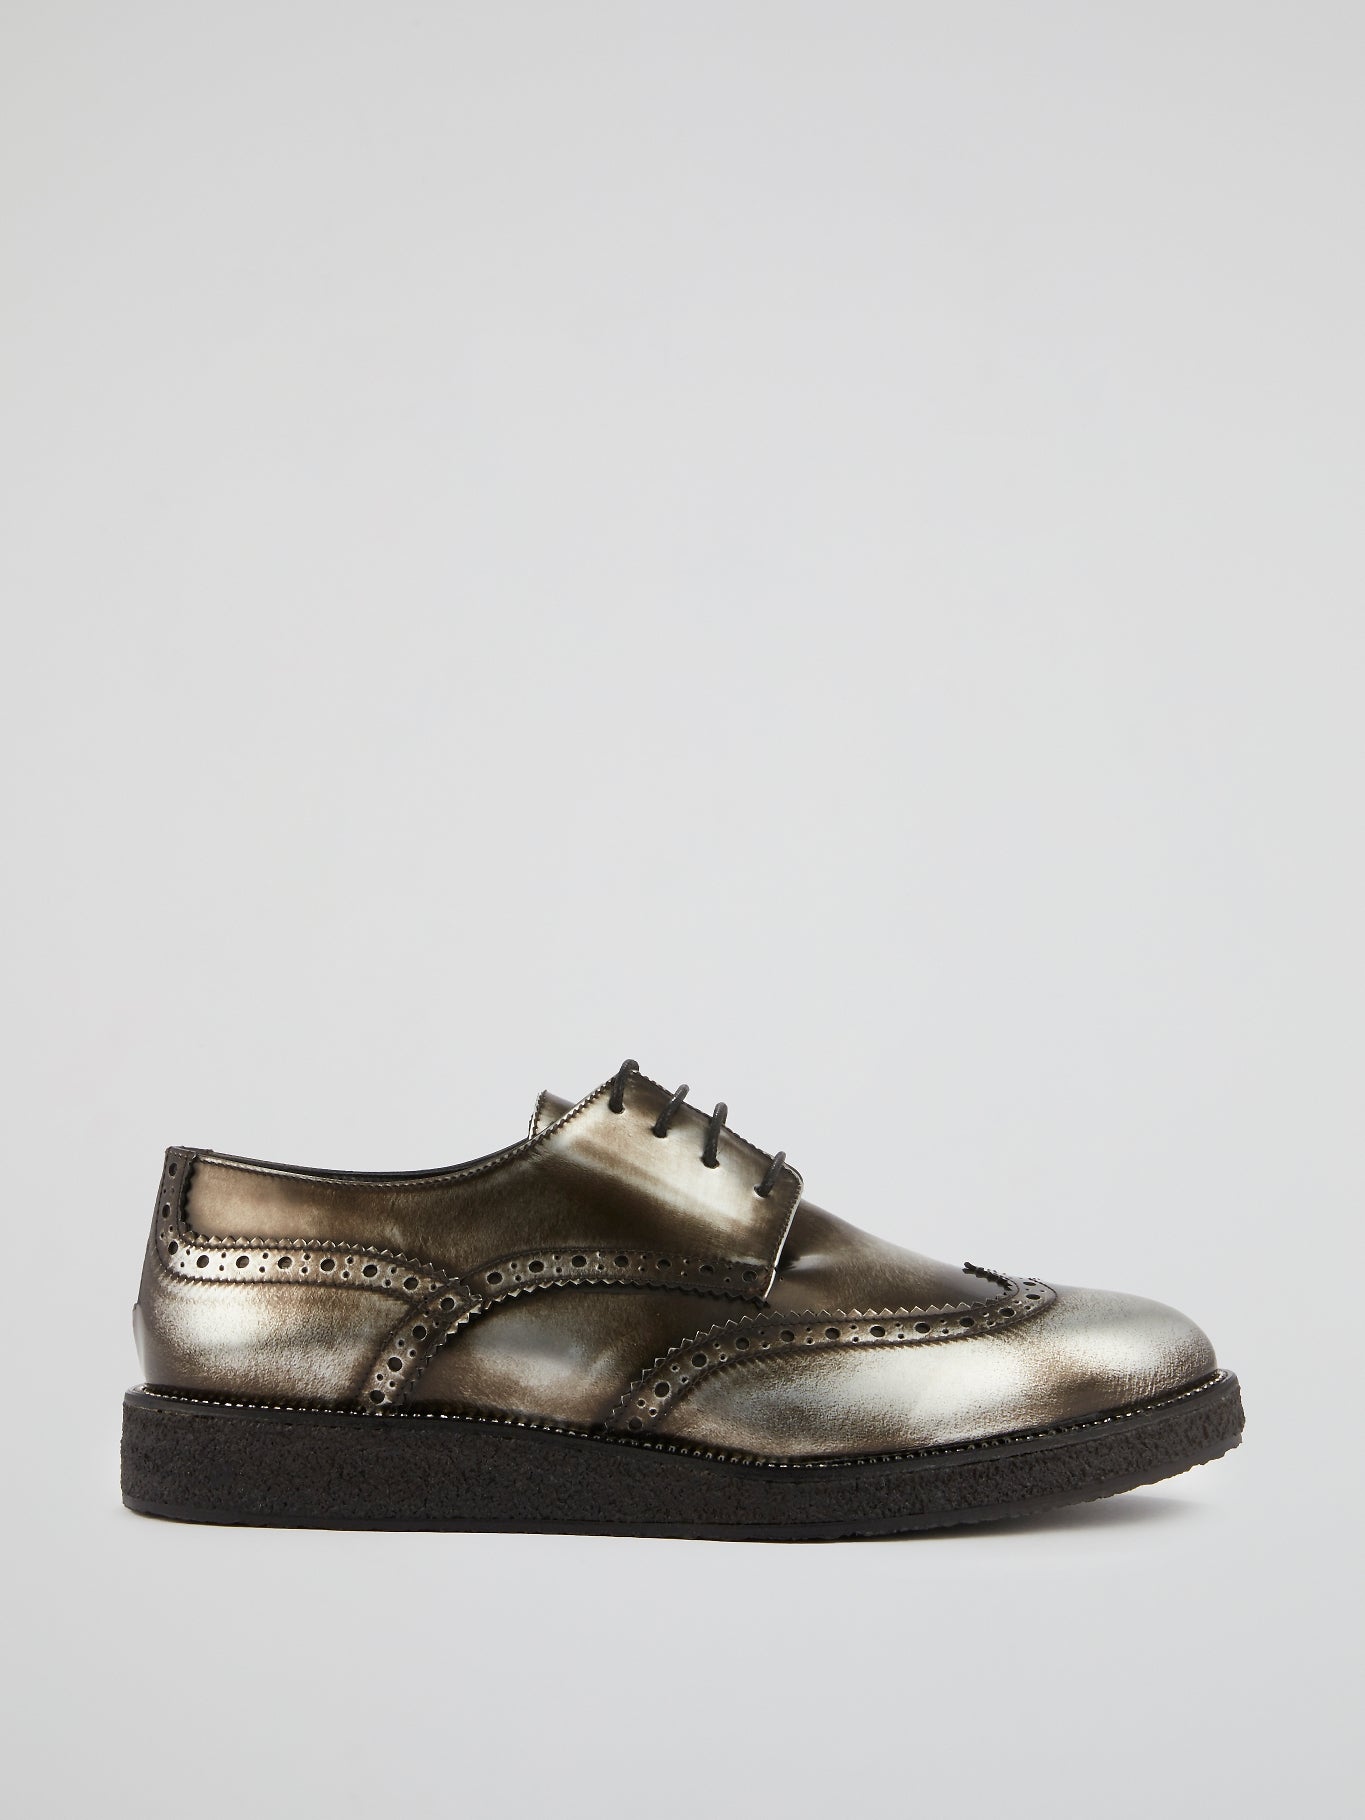 Silver Rustic Leather Brogues